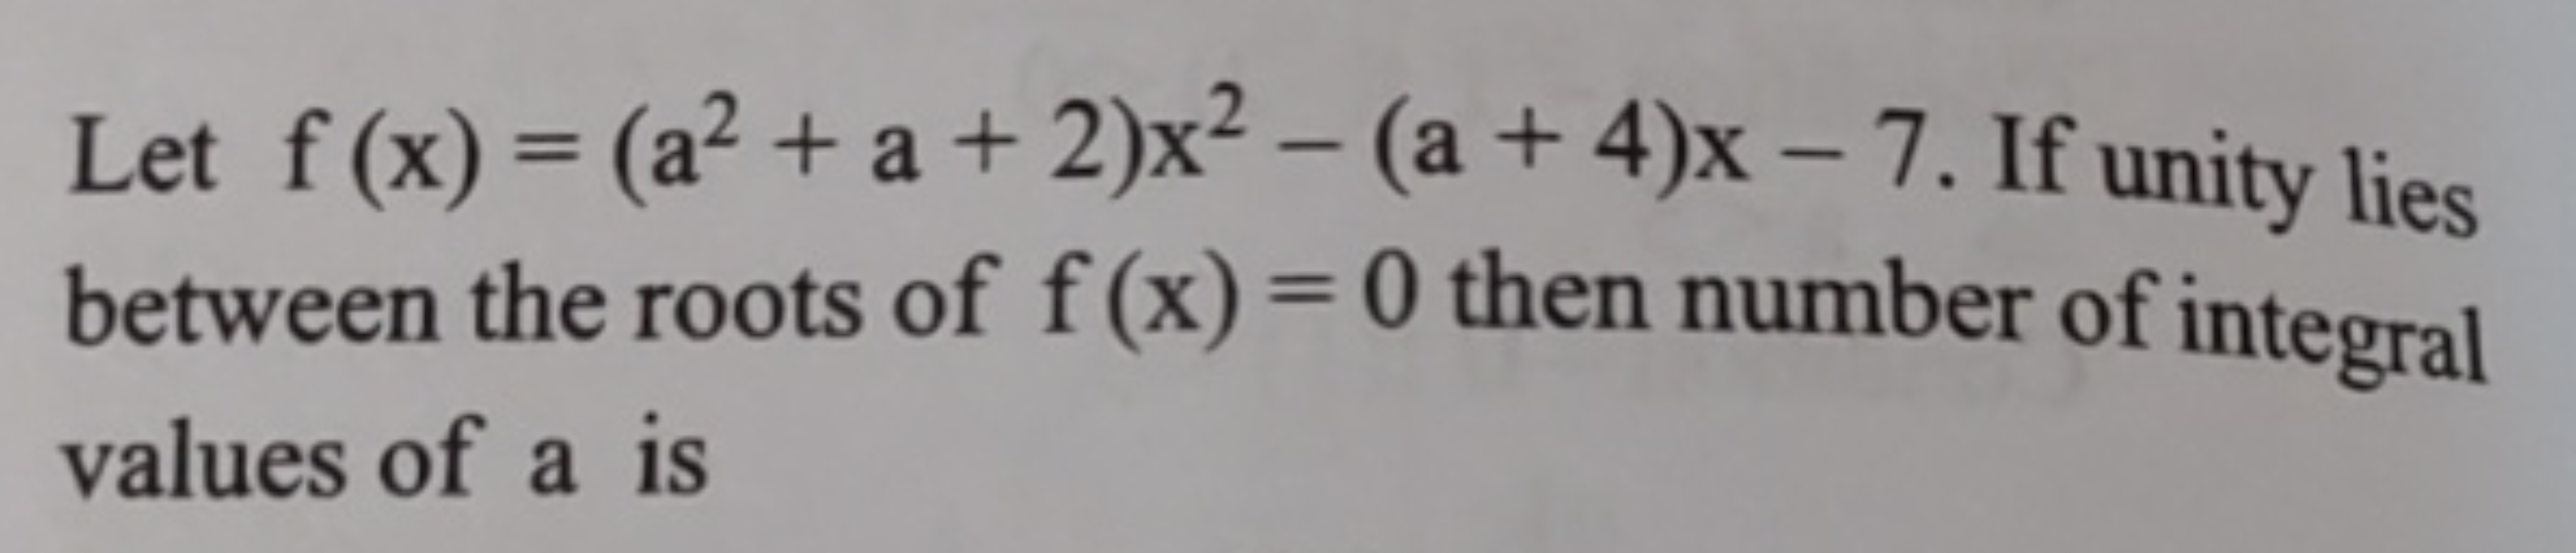 Let f(x)=(a2+a+2)x2−(a+4)x−7. If unity lies between the roots of f(x)=